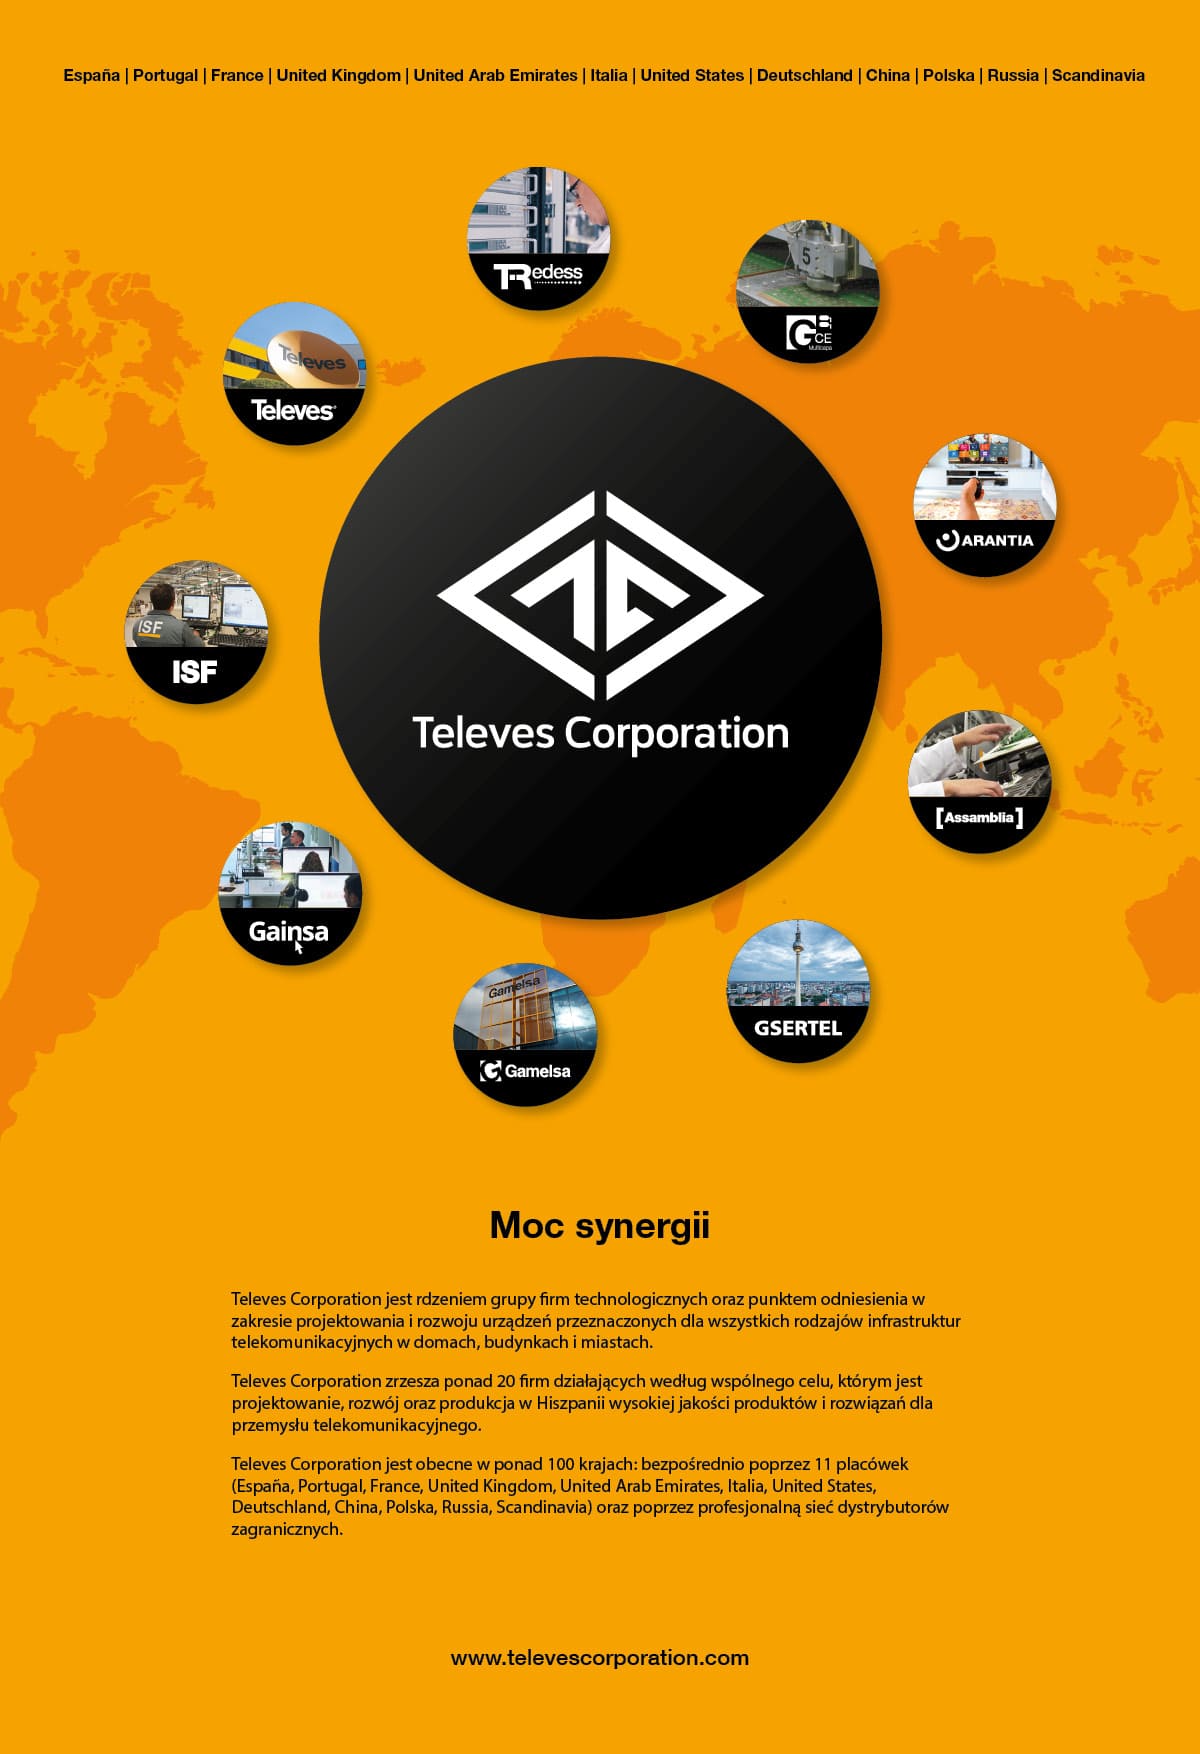 Televes Corporation, moc synergii